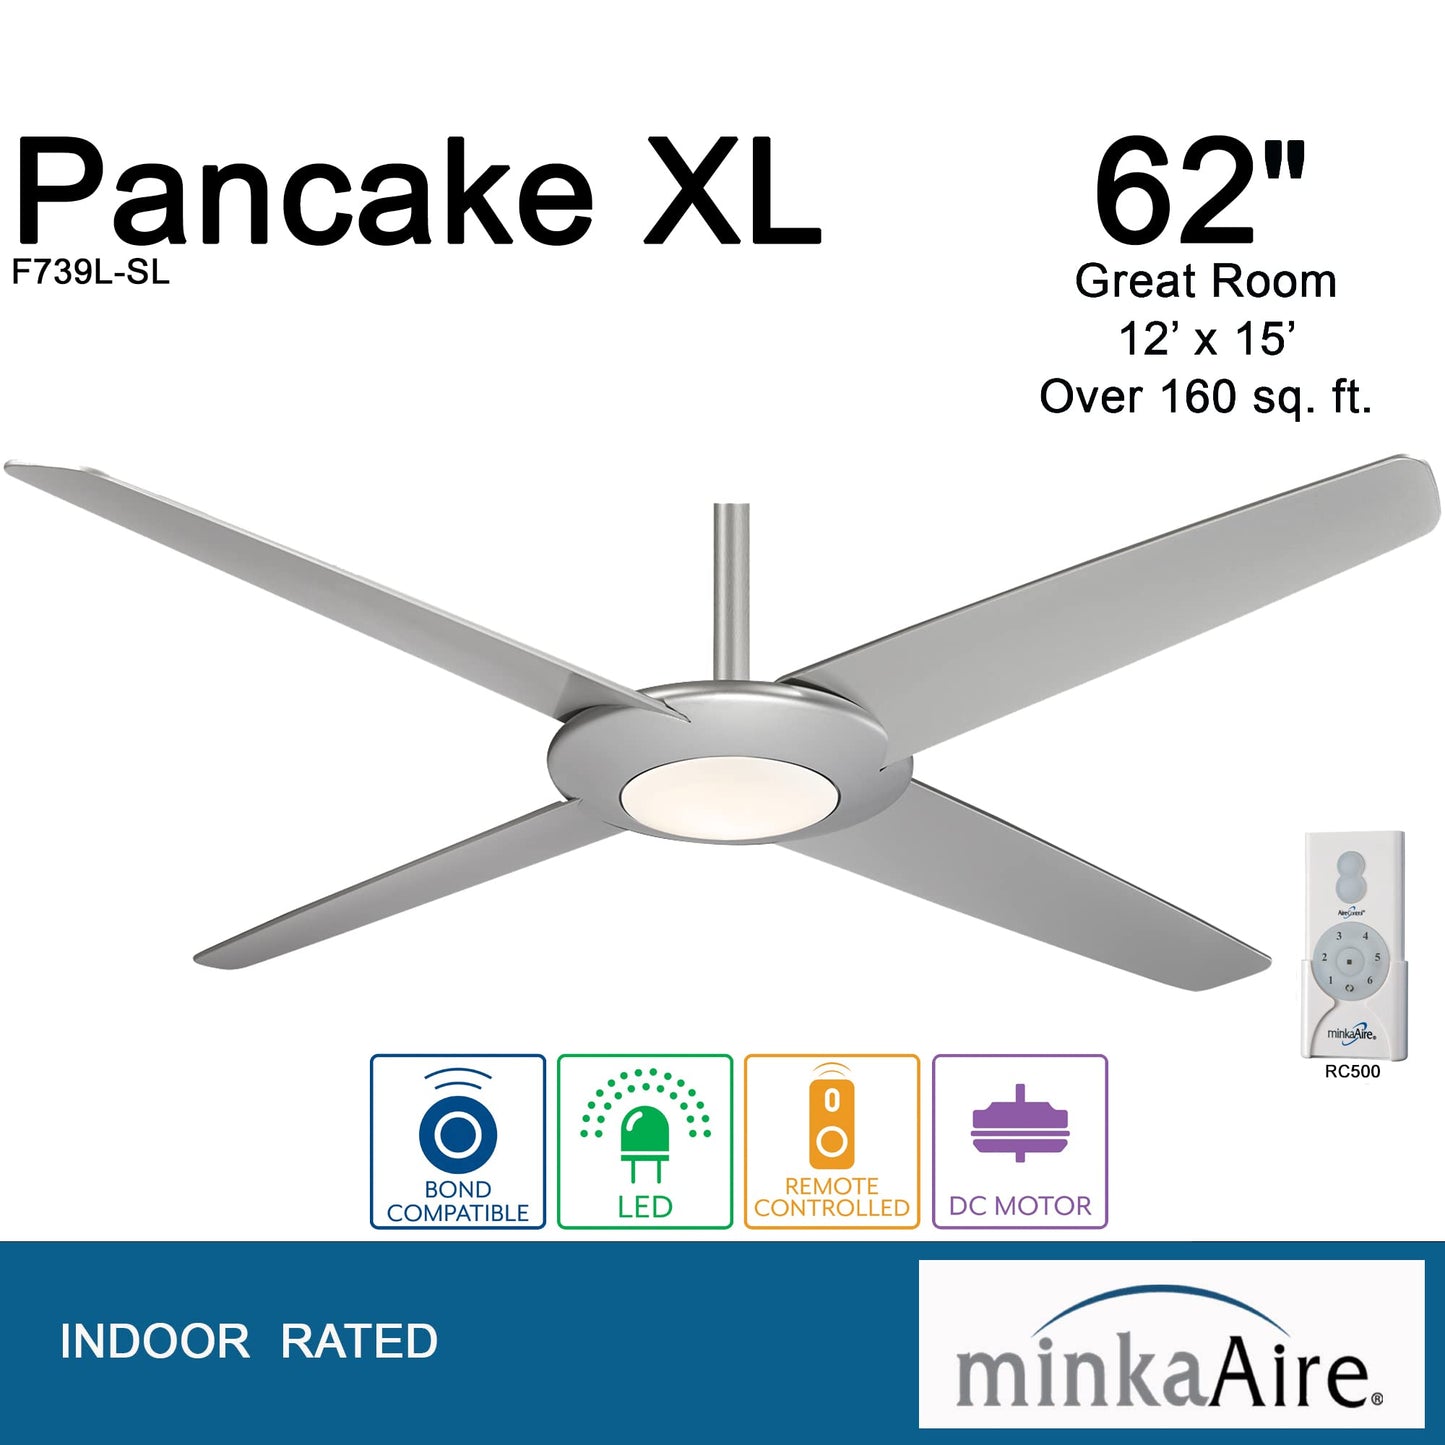 MINKA-AIRE F739L-SL Pancake XL 62 Inch LED Ceiling Fan with DC Motor in Silver Finish - Like New